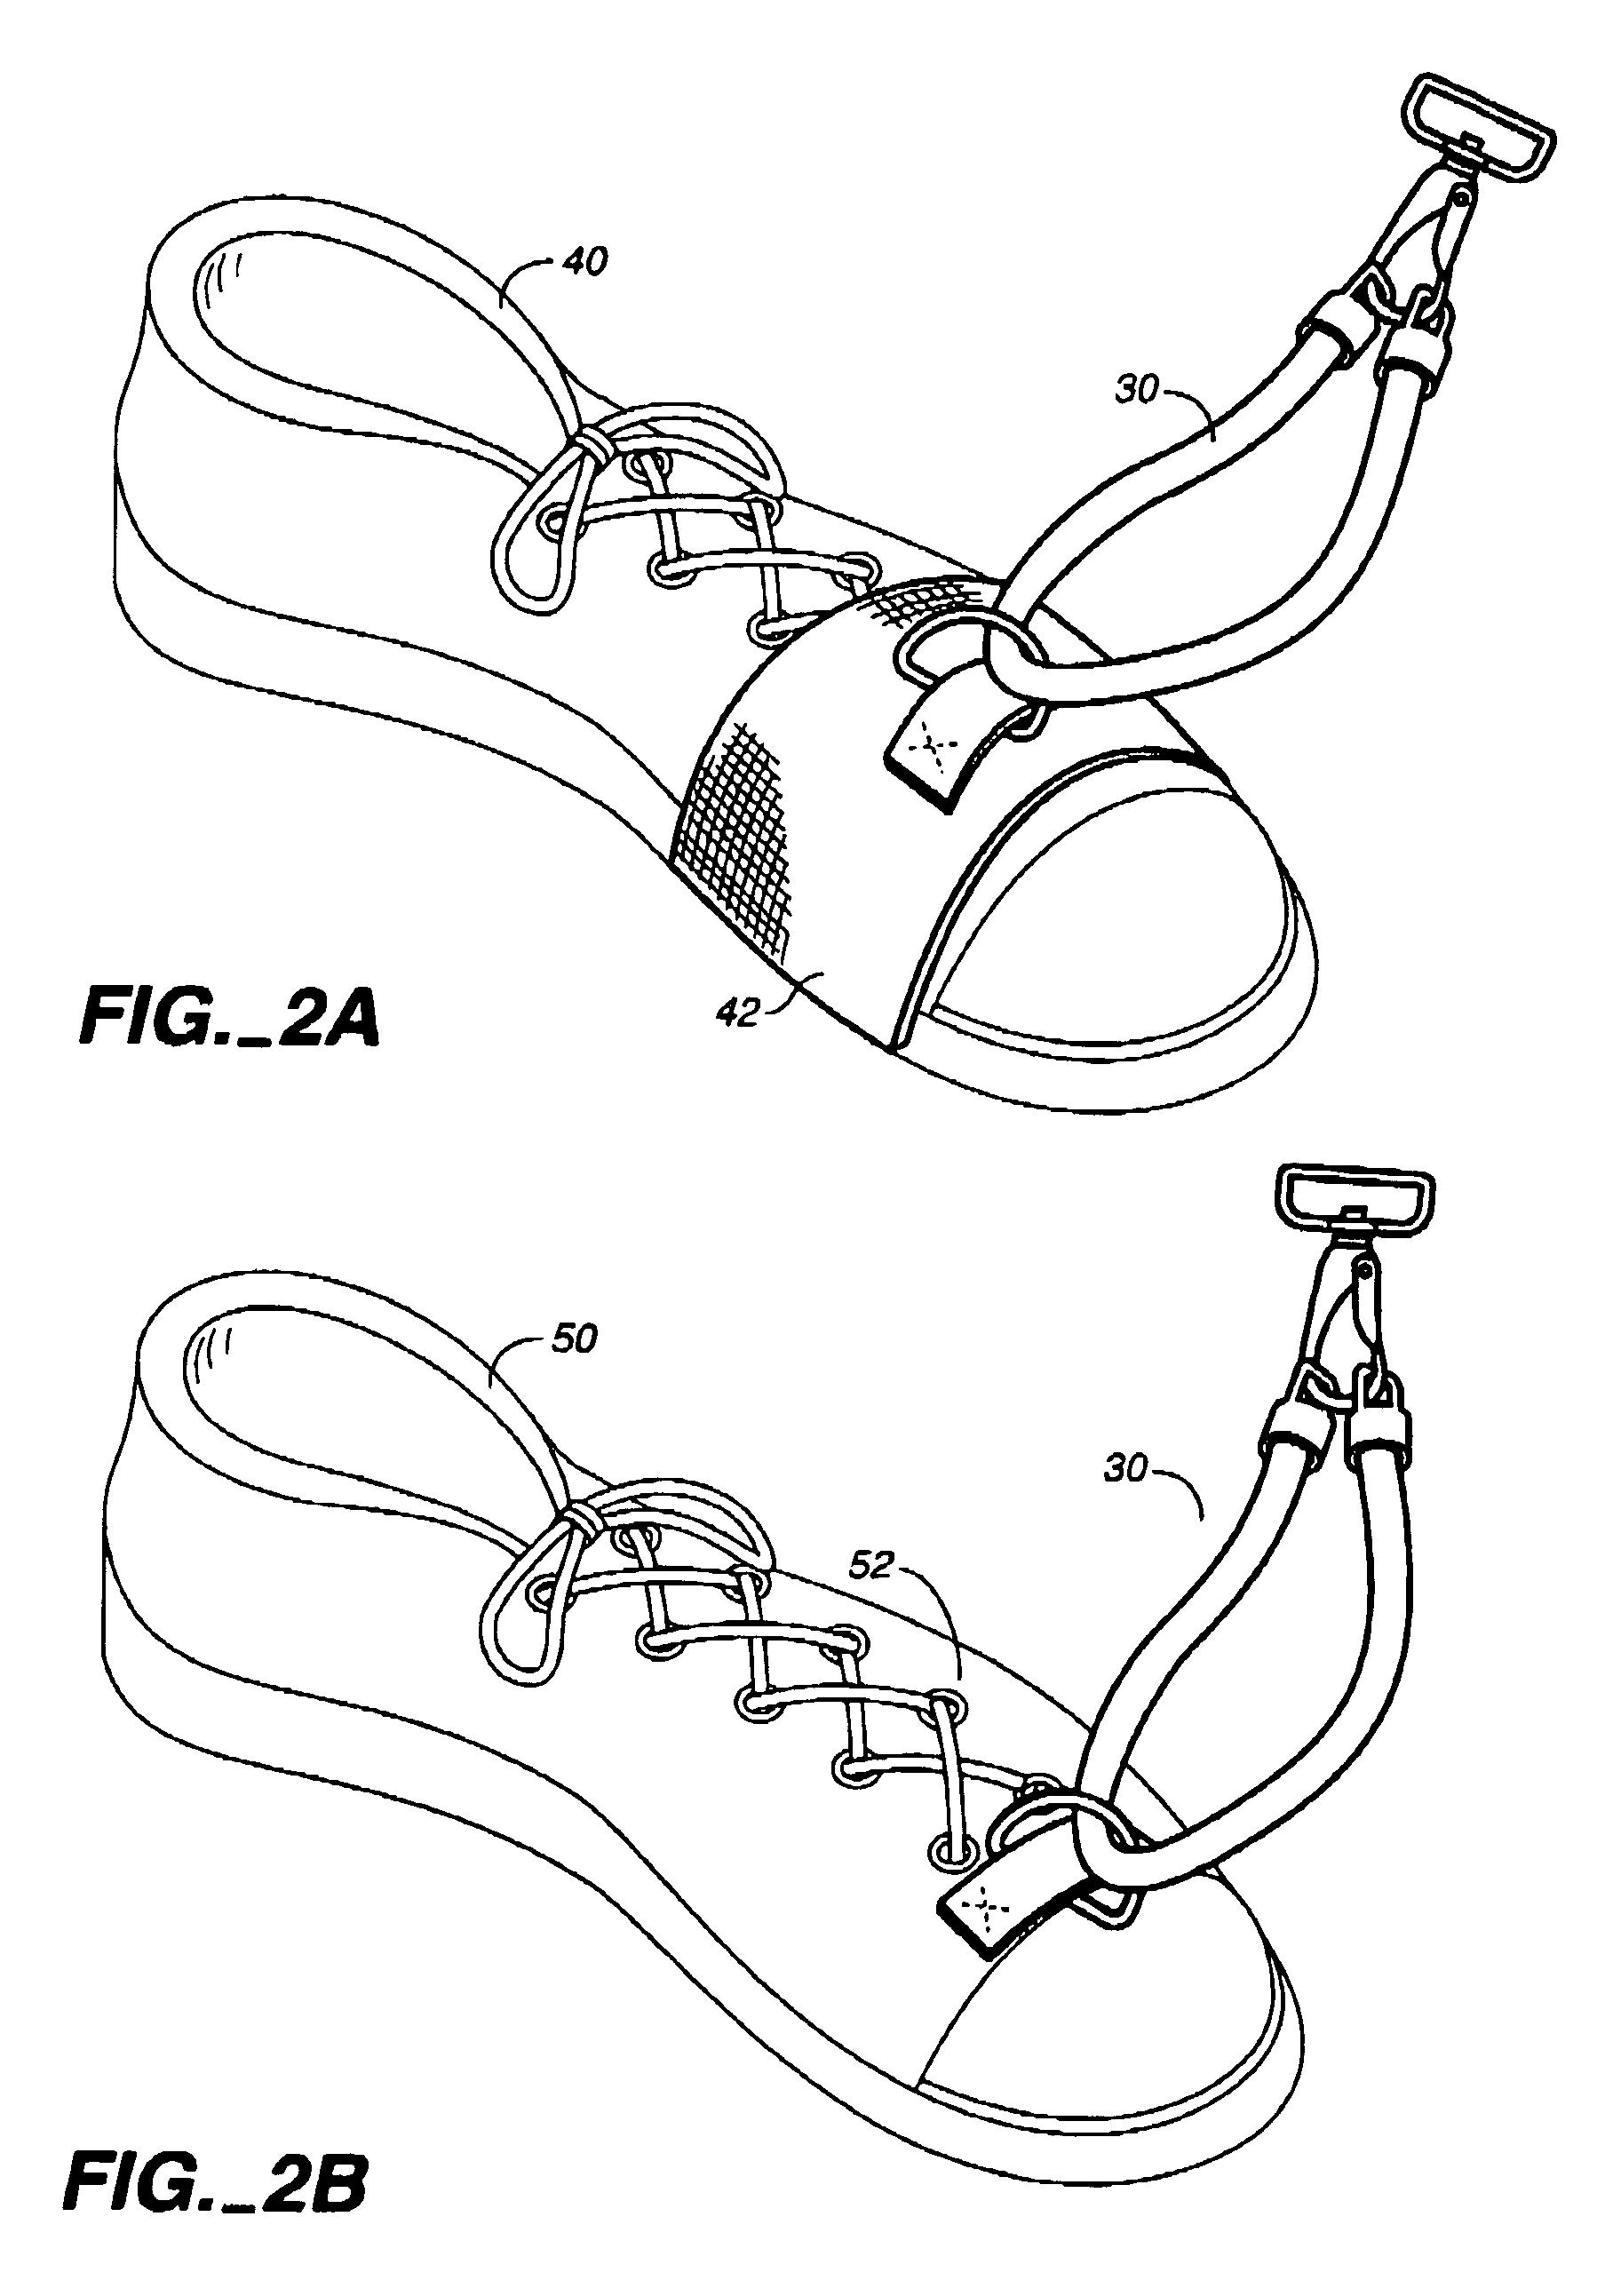 Method and apparatus for performing stretching and strengthening exercises